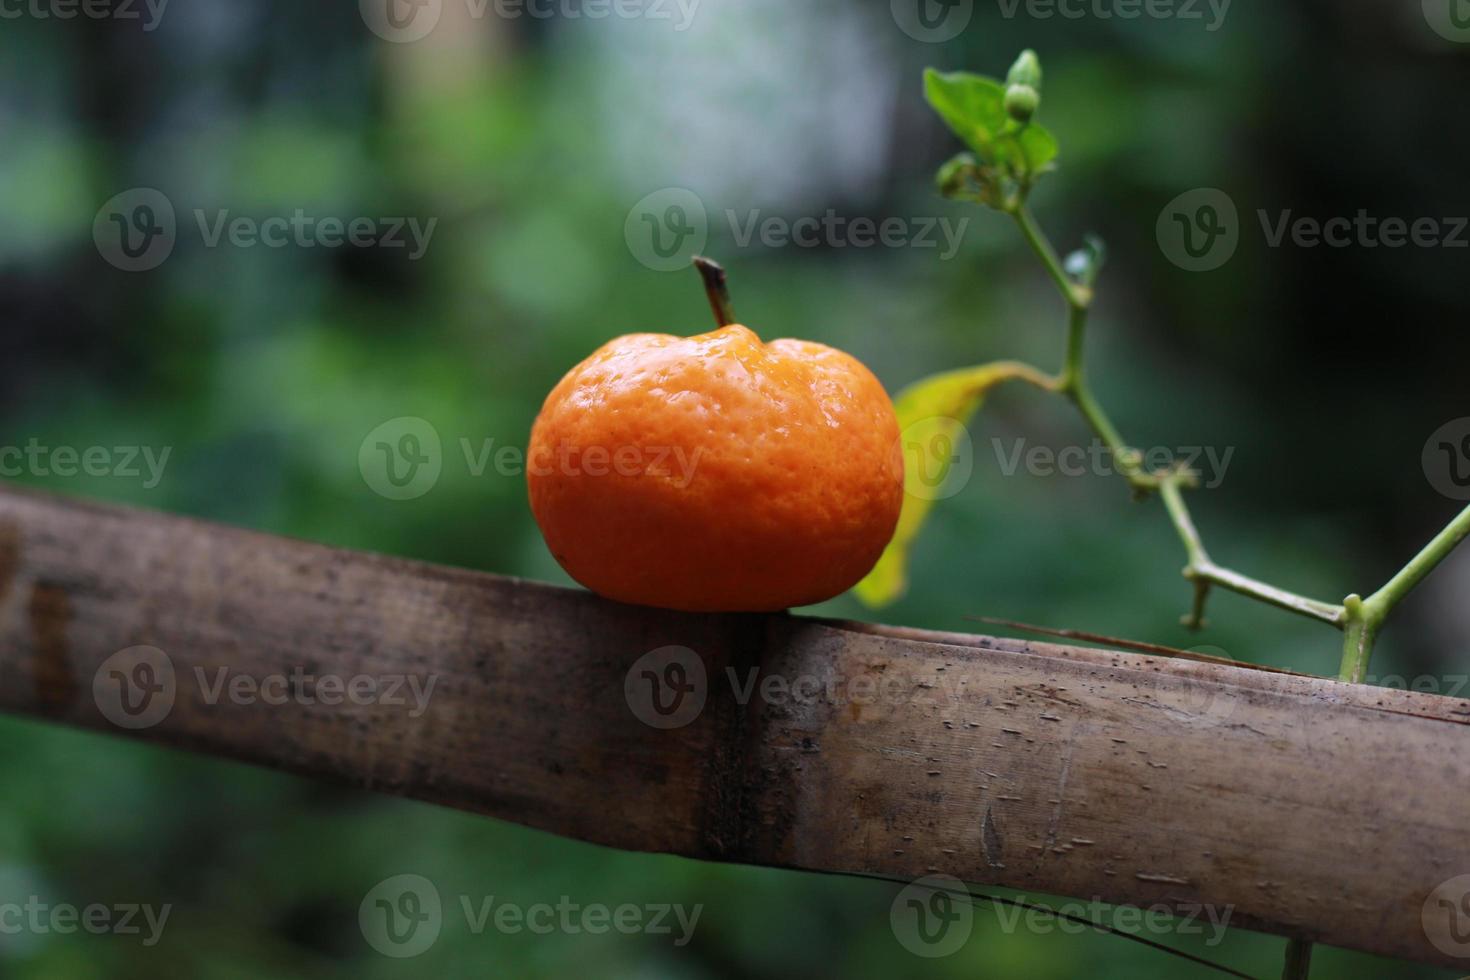 a close up of mini citrus fruits placed on bamboo sticks with trees in the background. fruit photo concept.